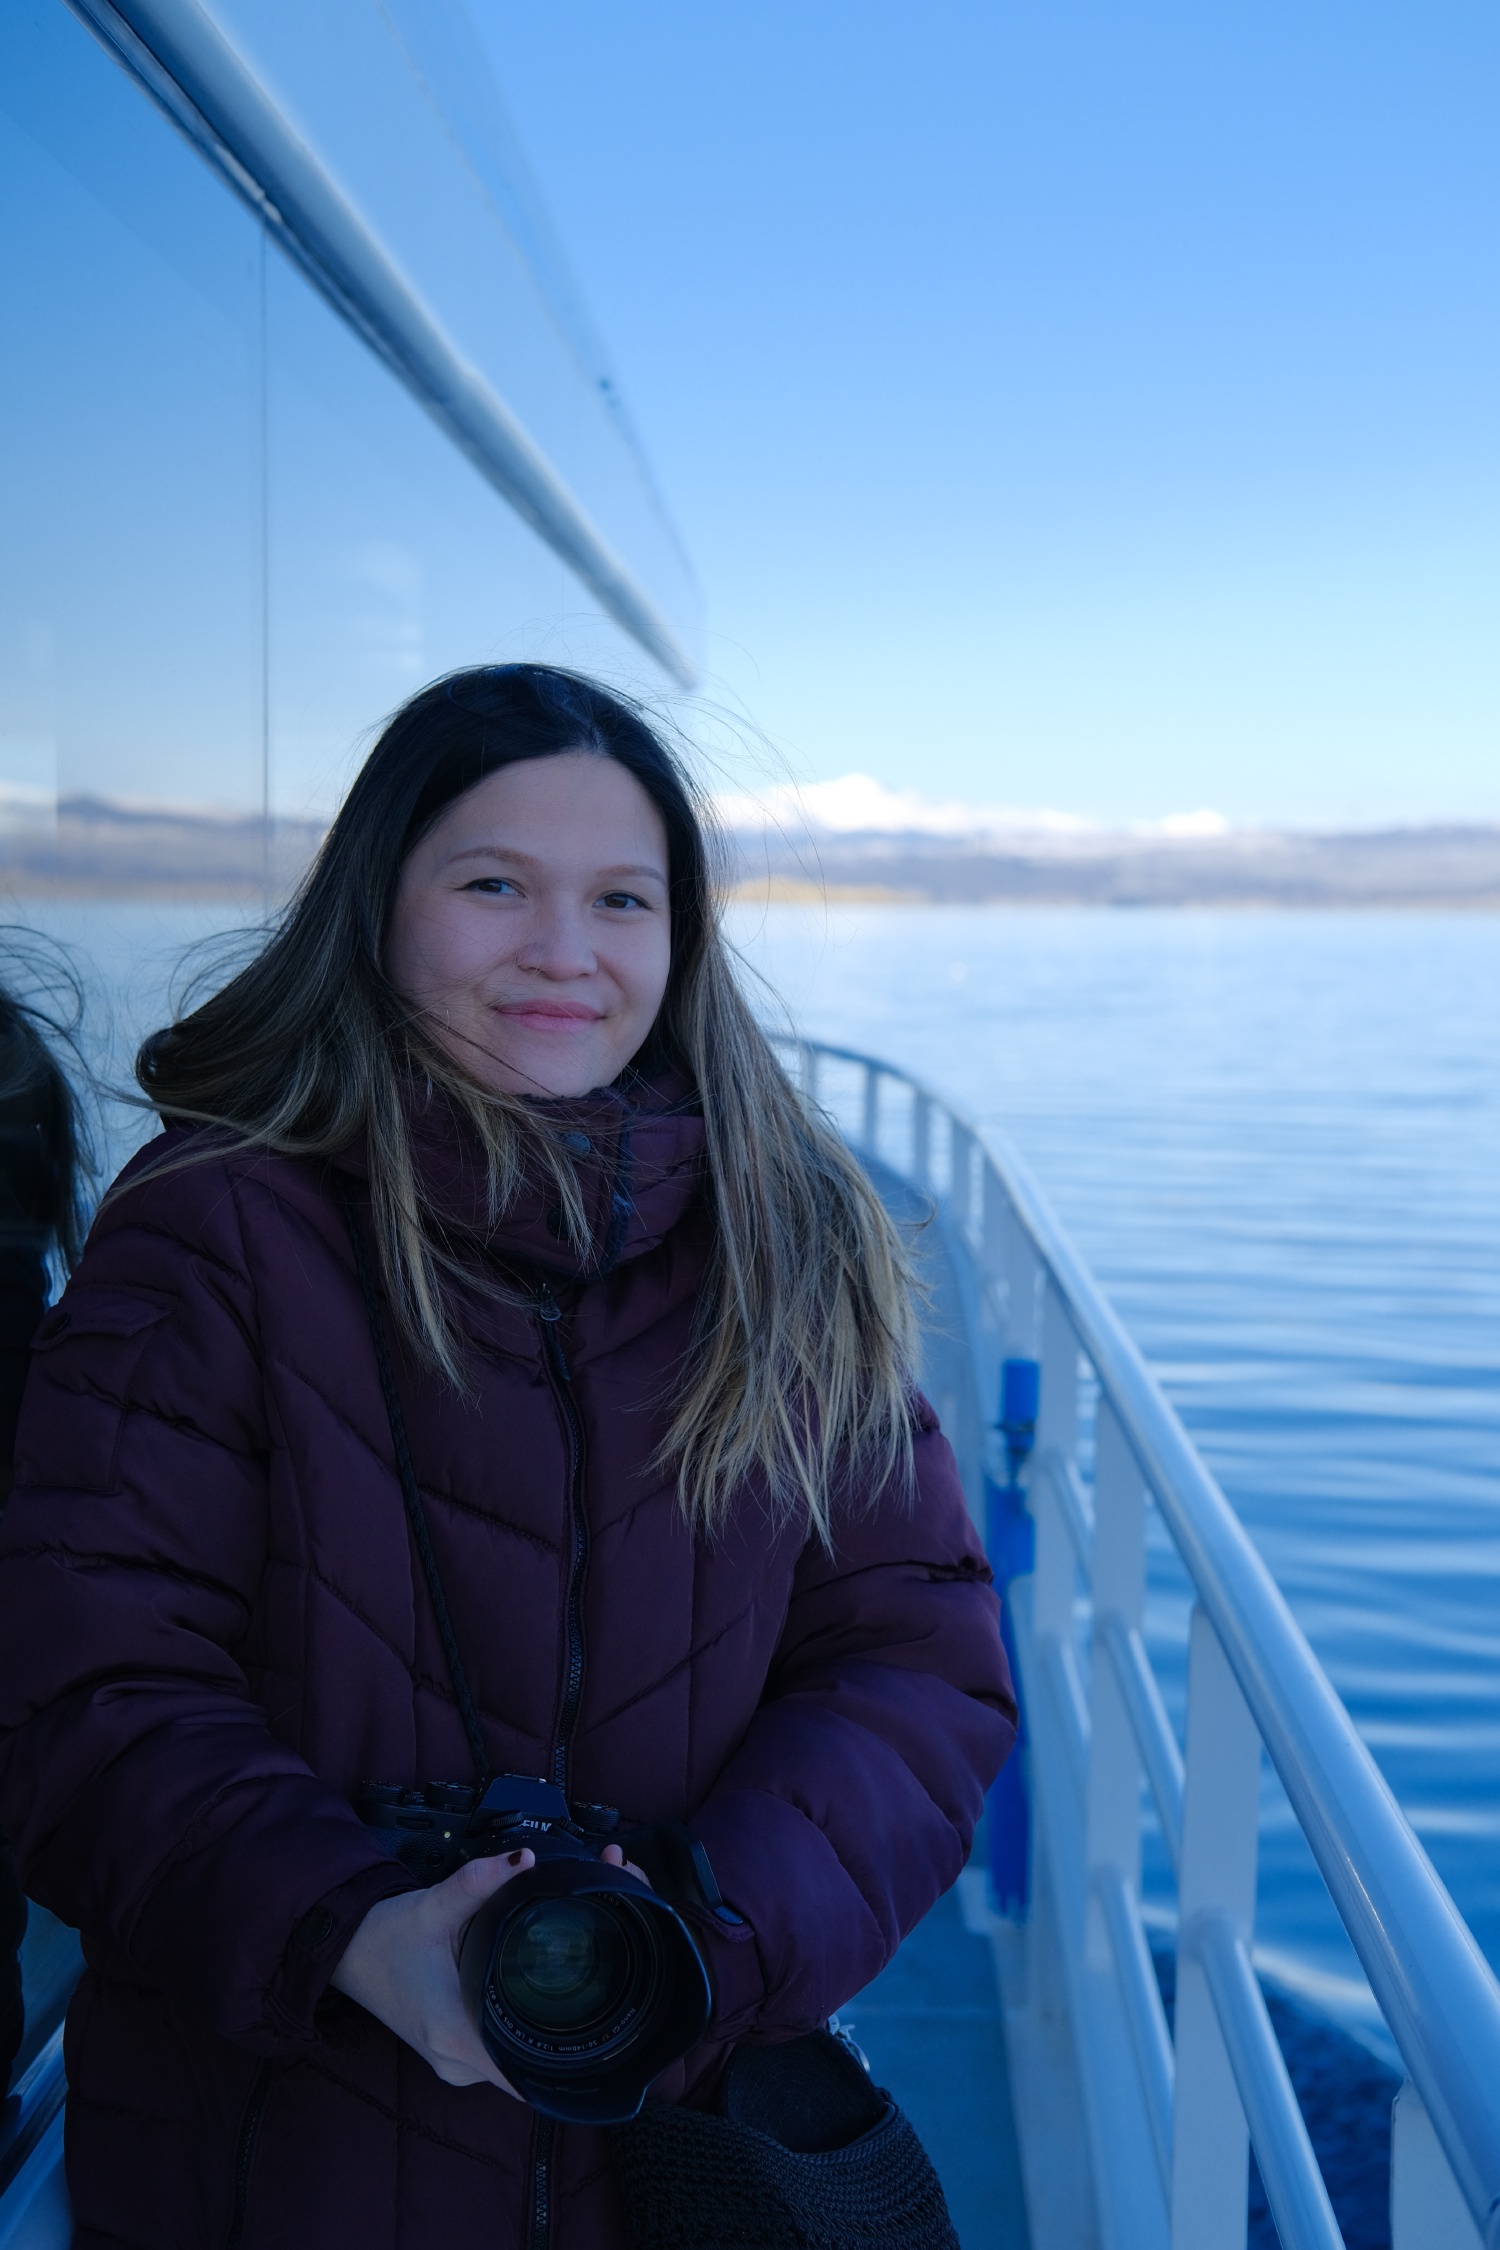 This was my favorite spot on the boat, as I am shielded from the cold wind, because my hands and face were already freezing!